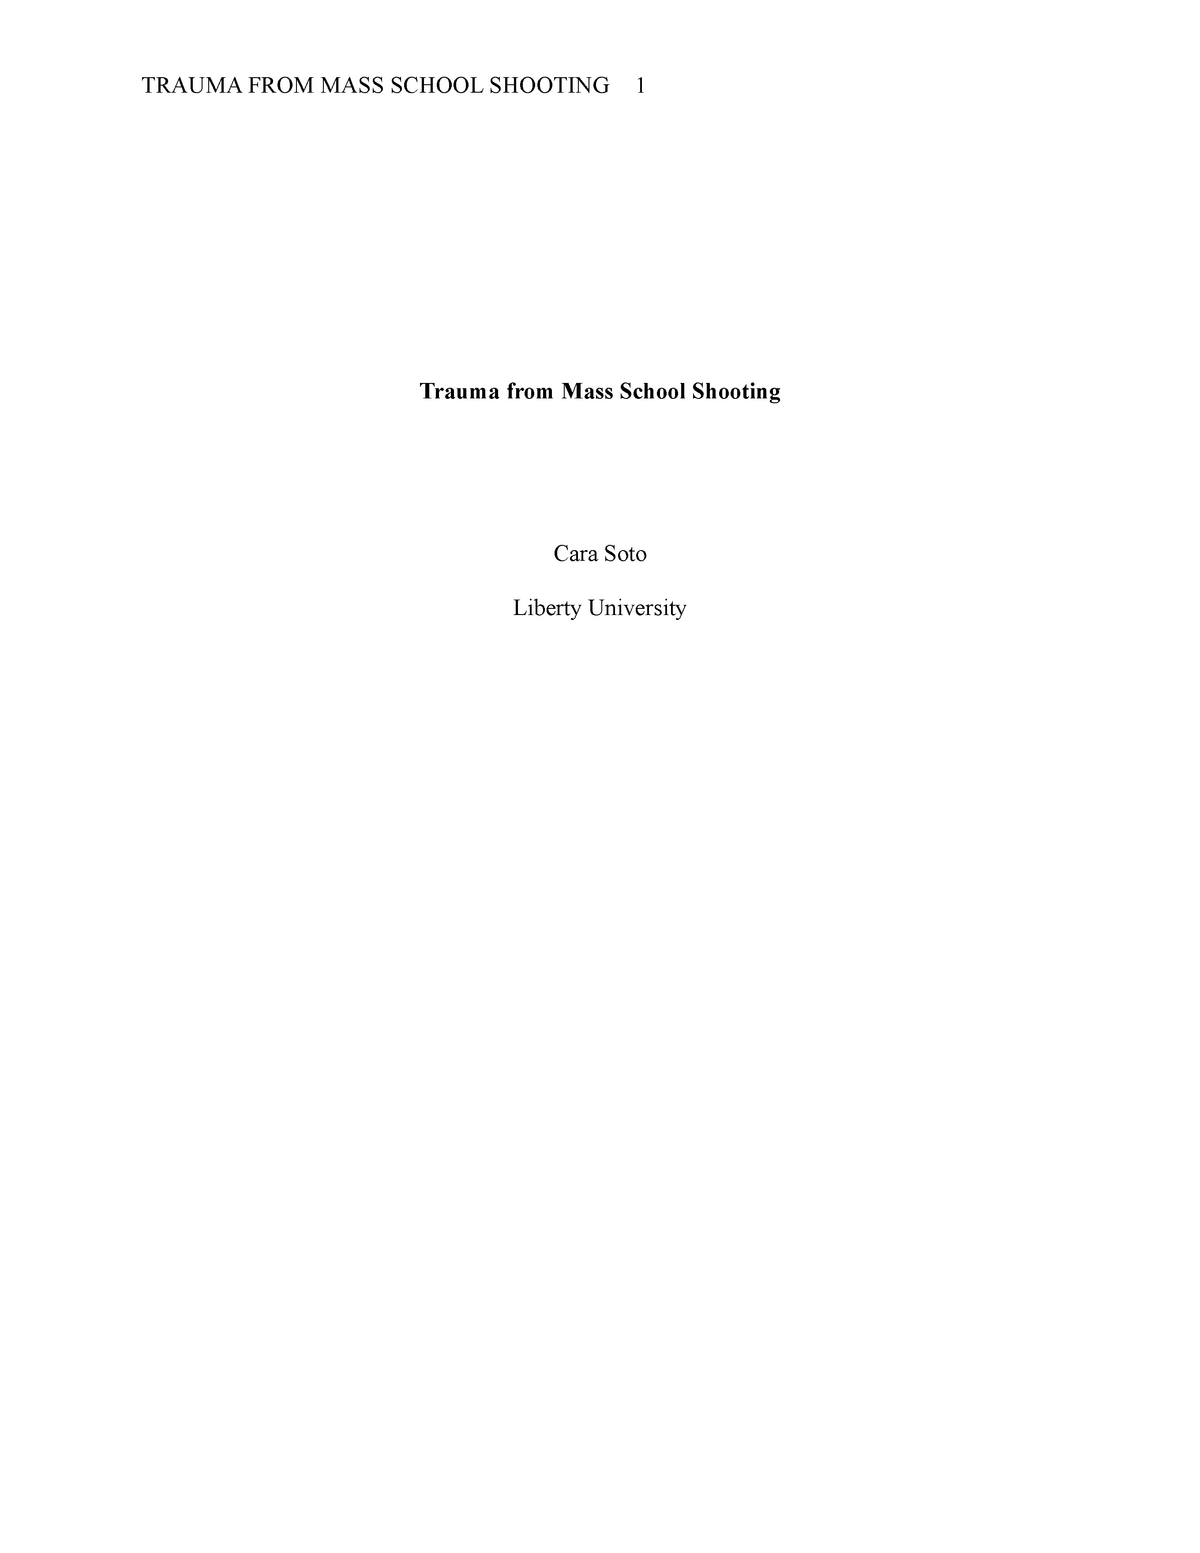 research paper about trauma